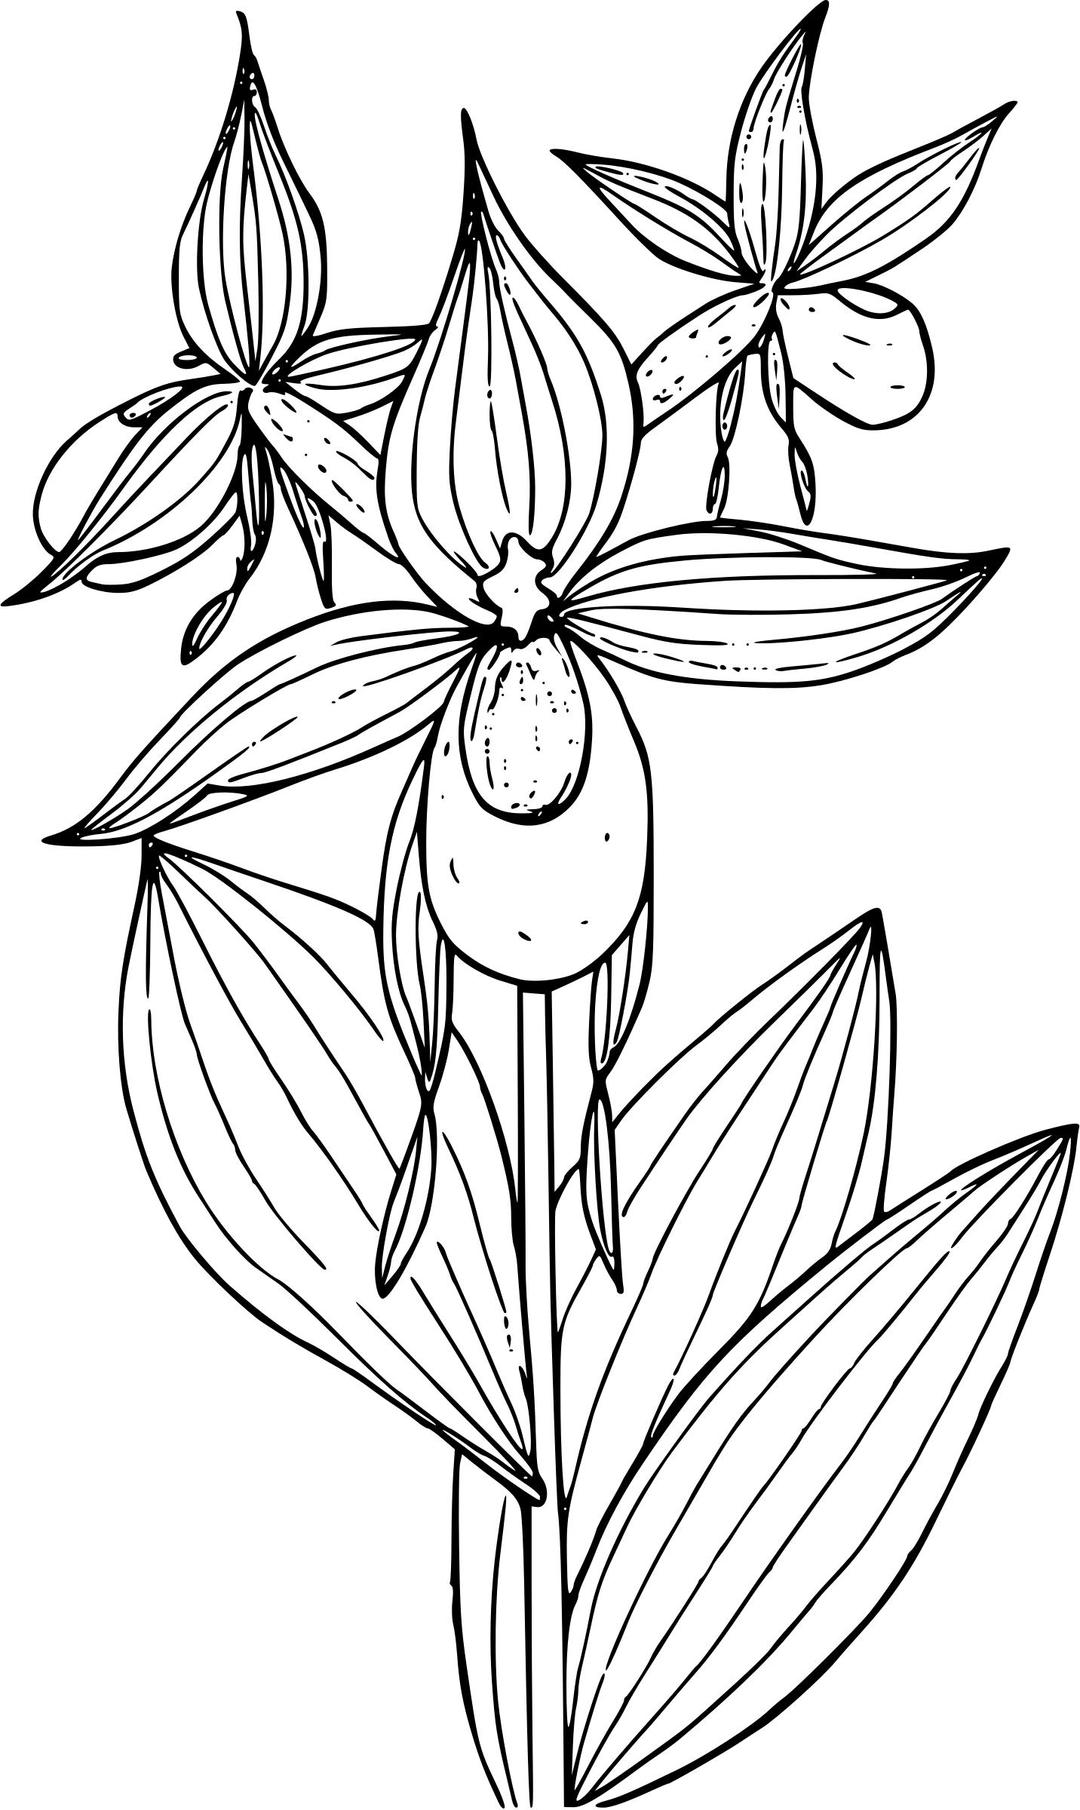 Mountain lady's slipper orchid png transparent